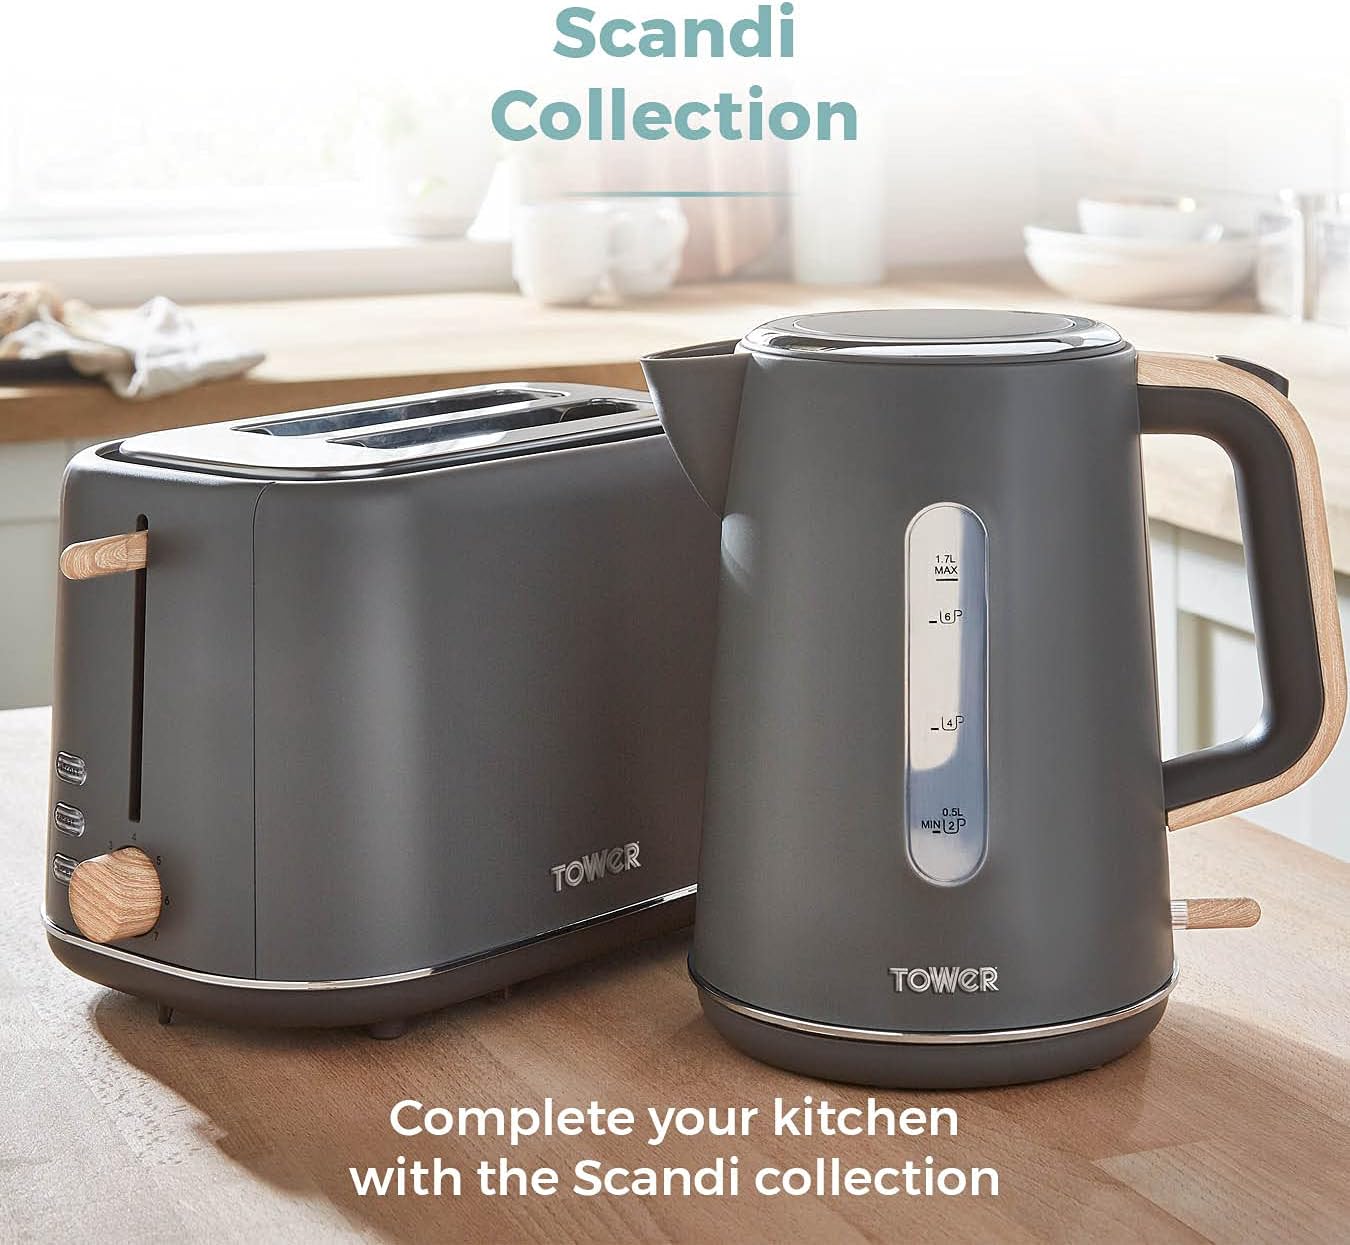 TOWER T20027BLK Scandi 2 Slice Toaster with Adjustable Browning Control, Centring Function, 800W, Black